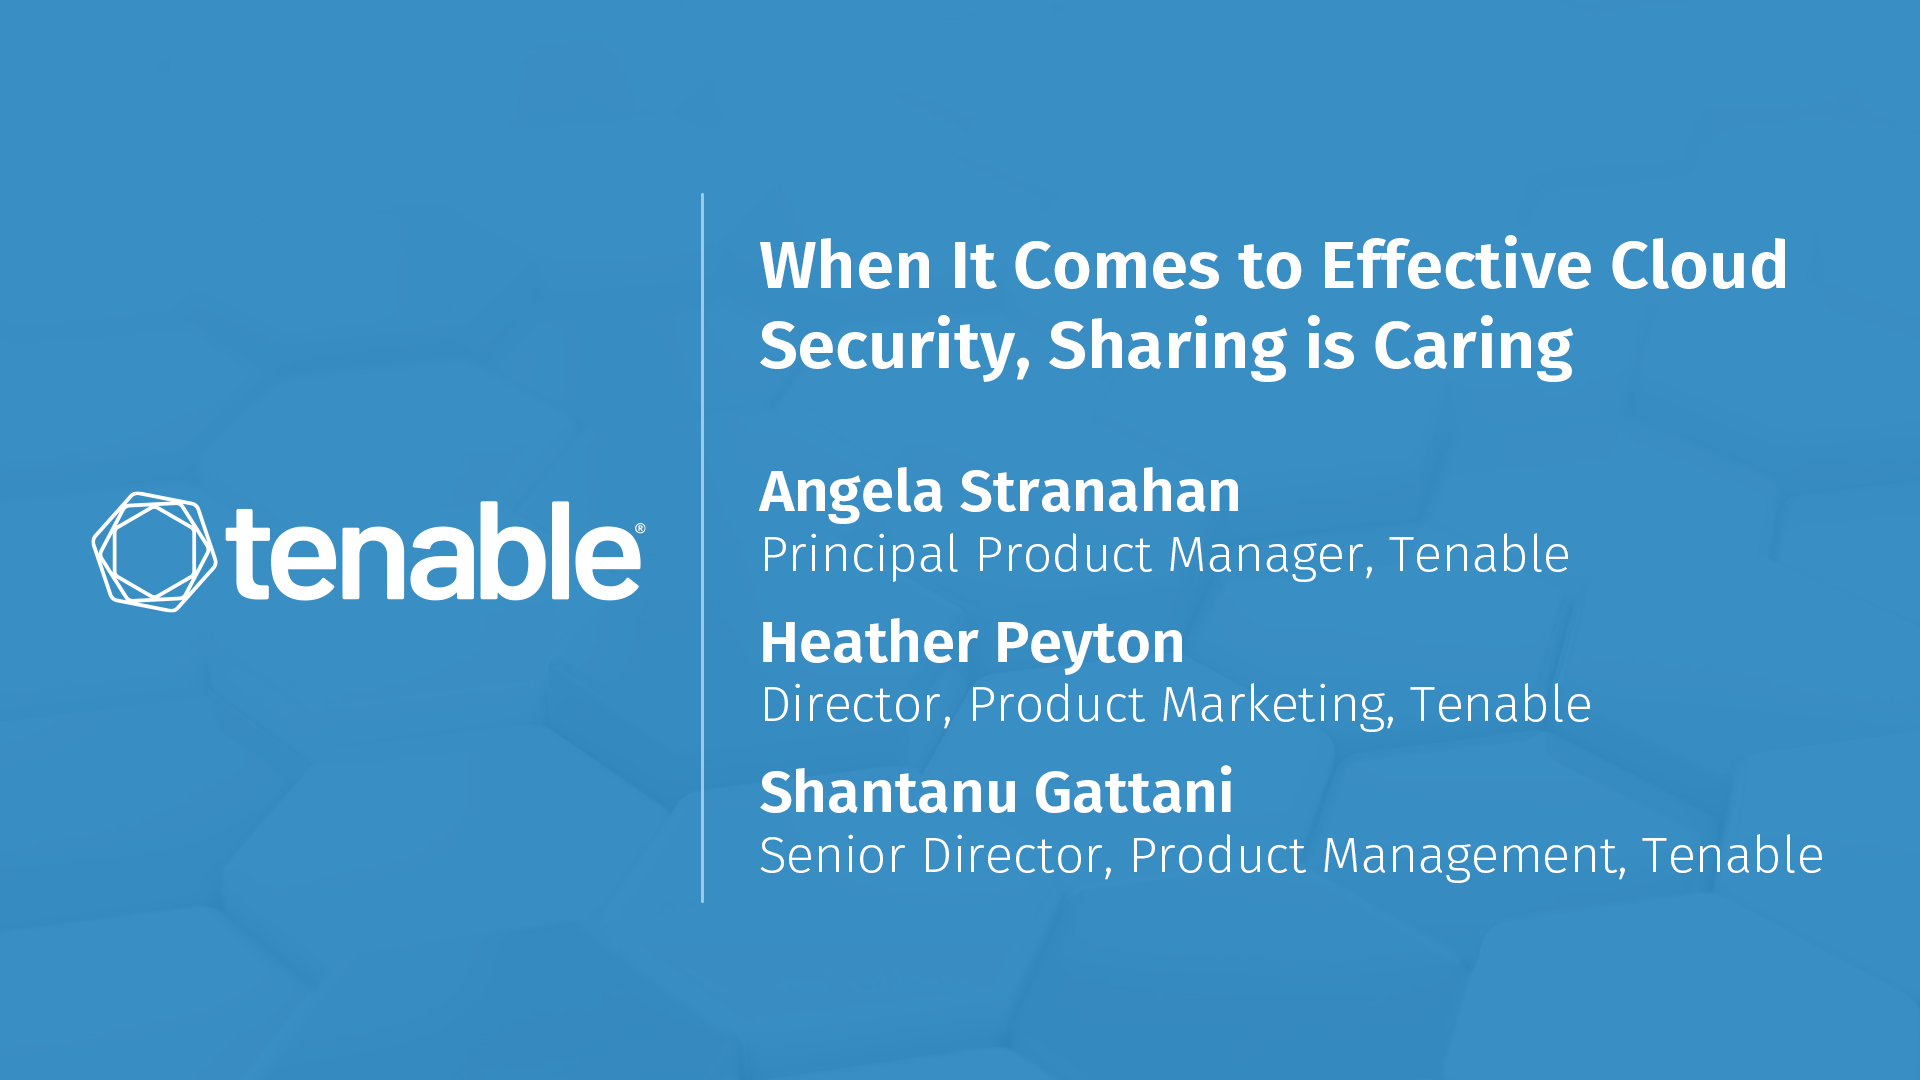 When It Comes to Effective Cloud Security, Sharing is Caring